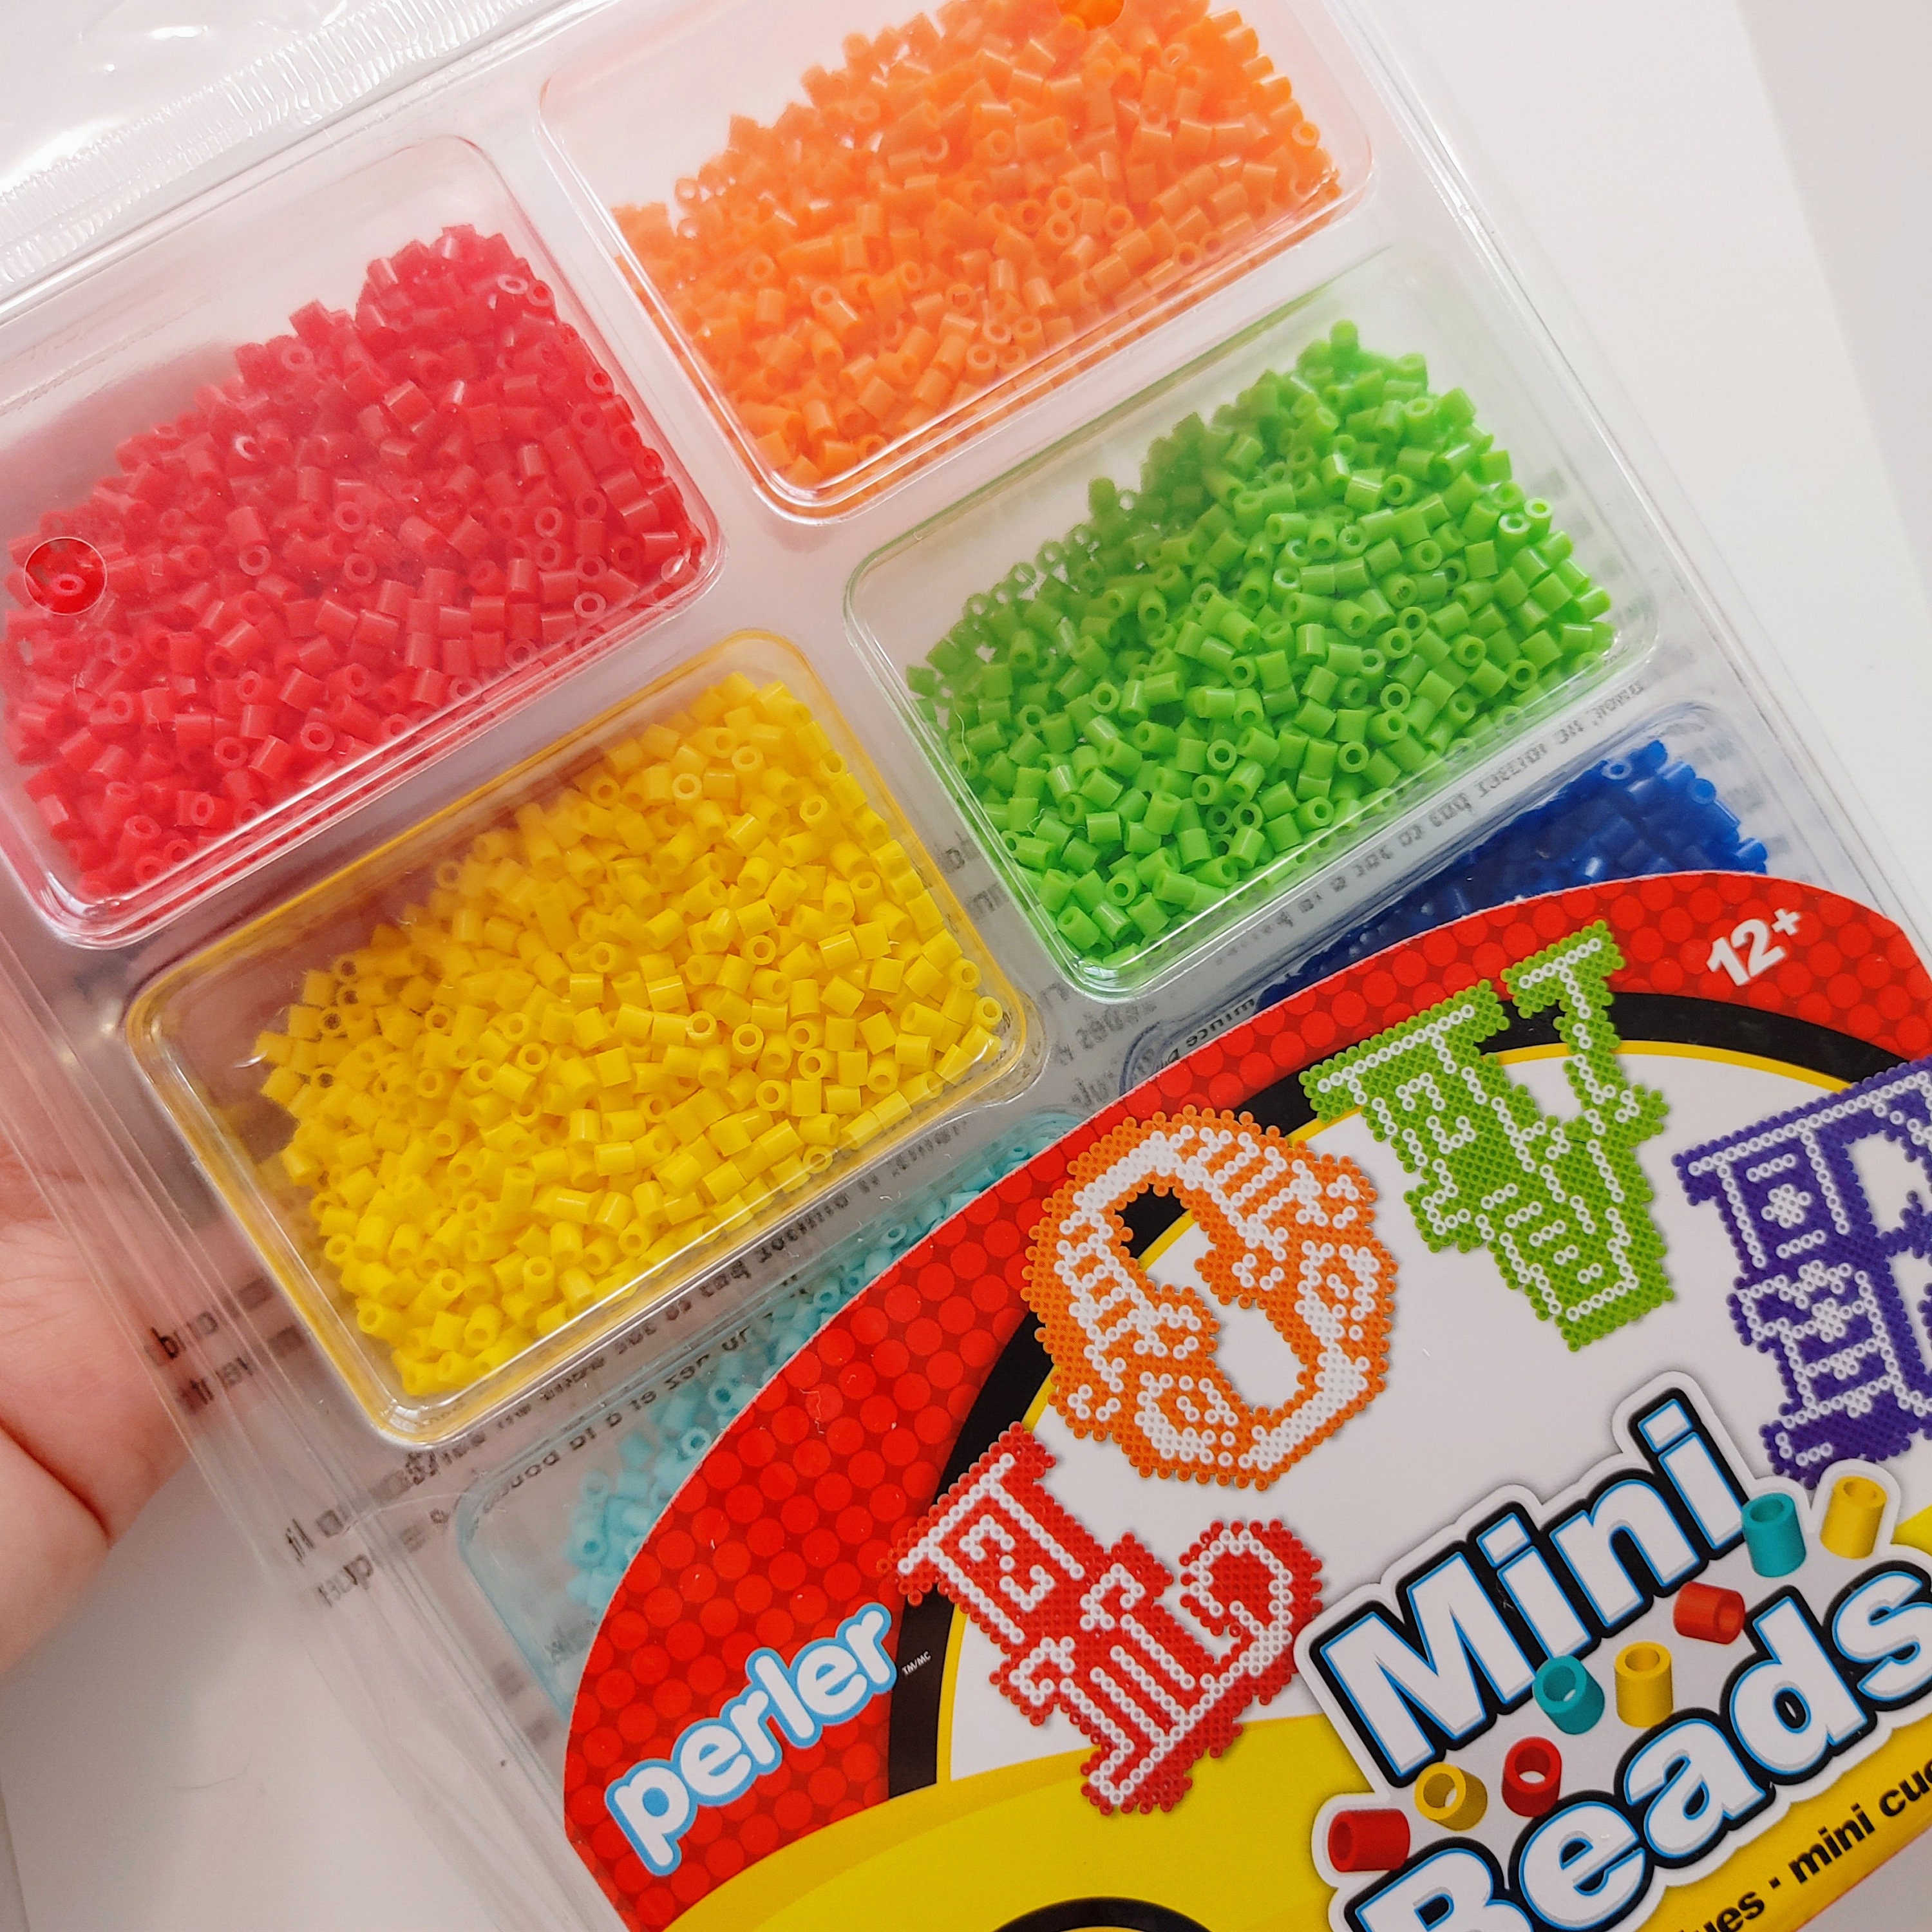 Perler Bead Tray - Assorted Colors, Pkg of 8000